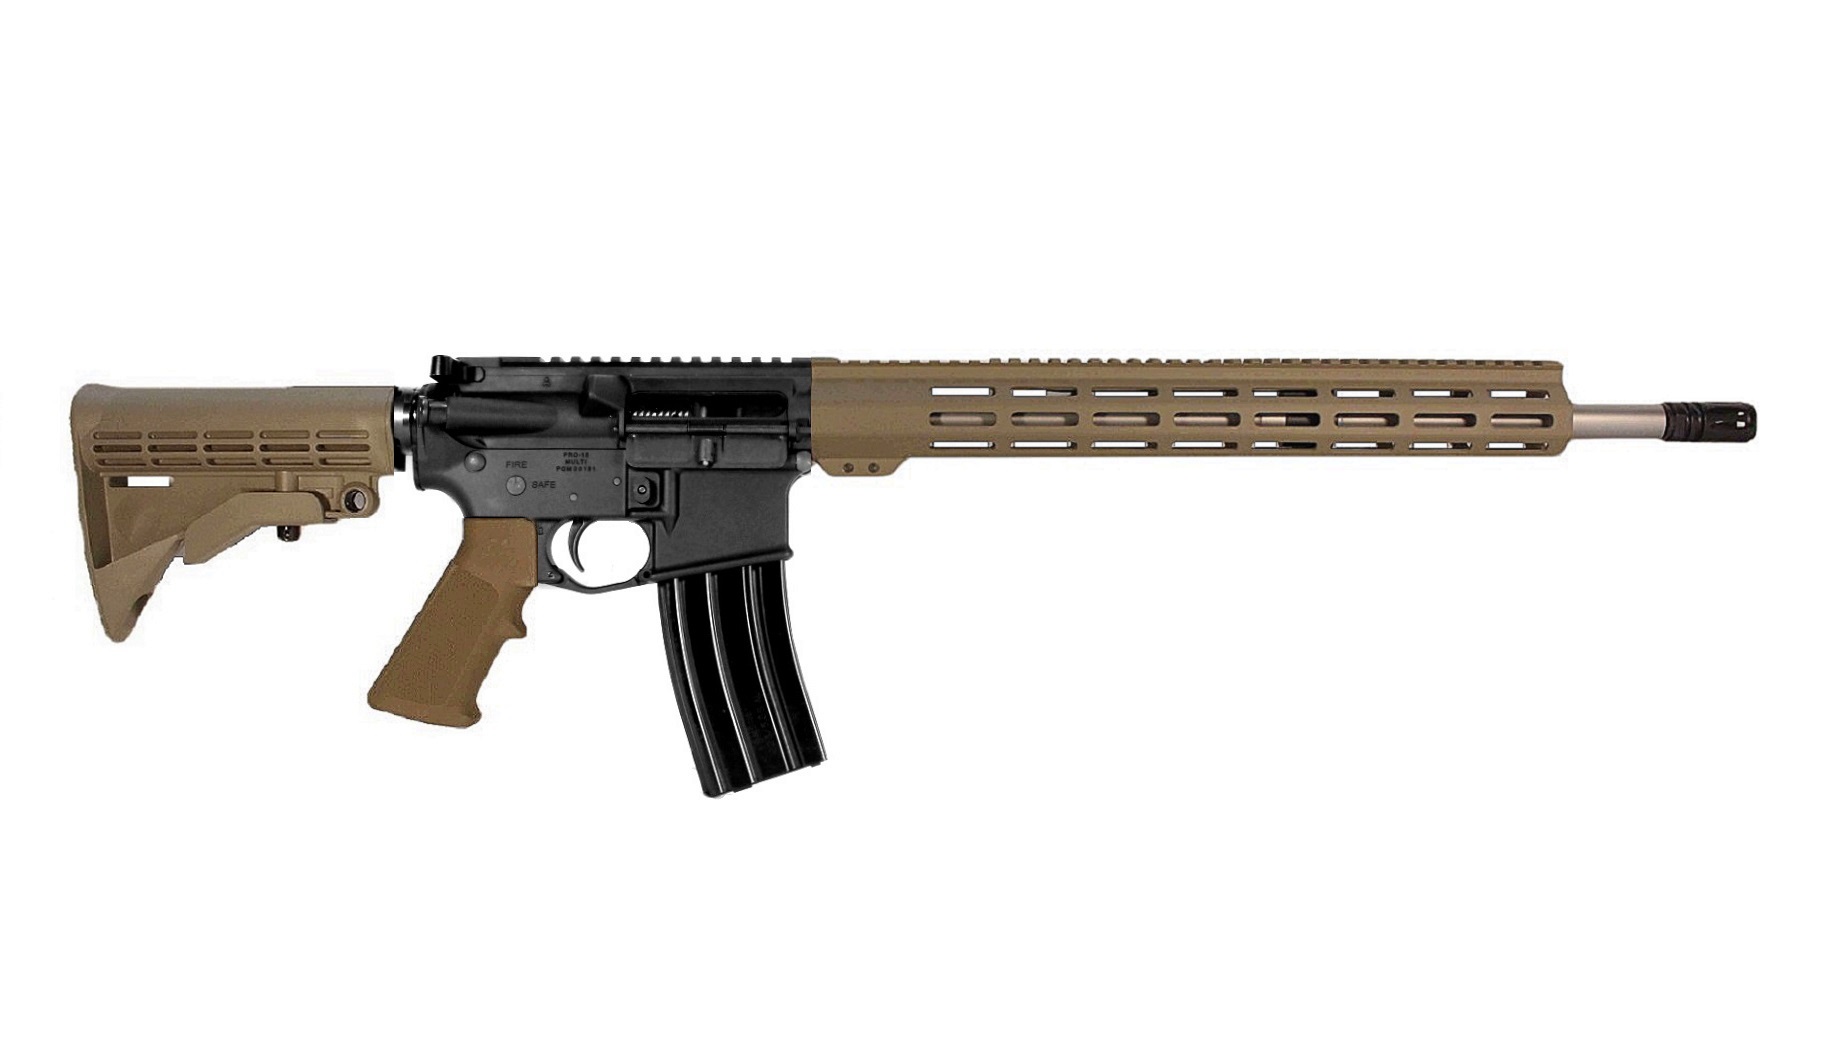 18 inch 223 Wylde Stainless Rifle BLK/FDE 2 Tone Finish